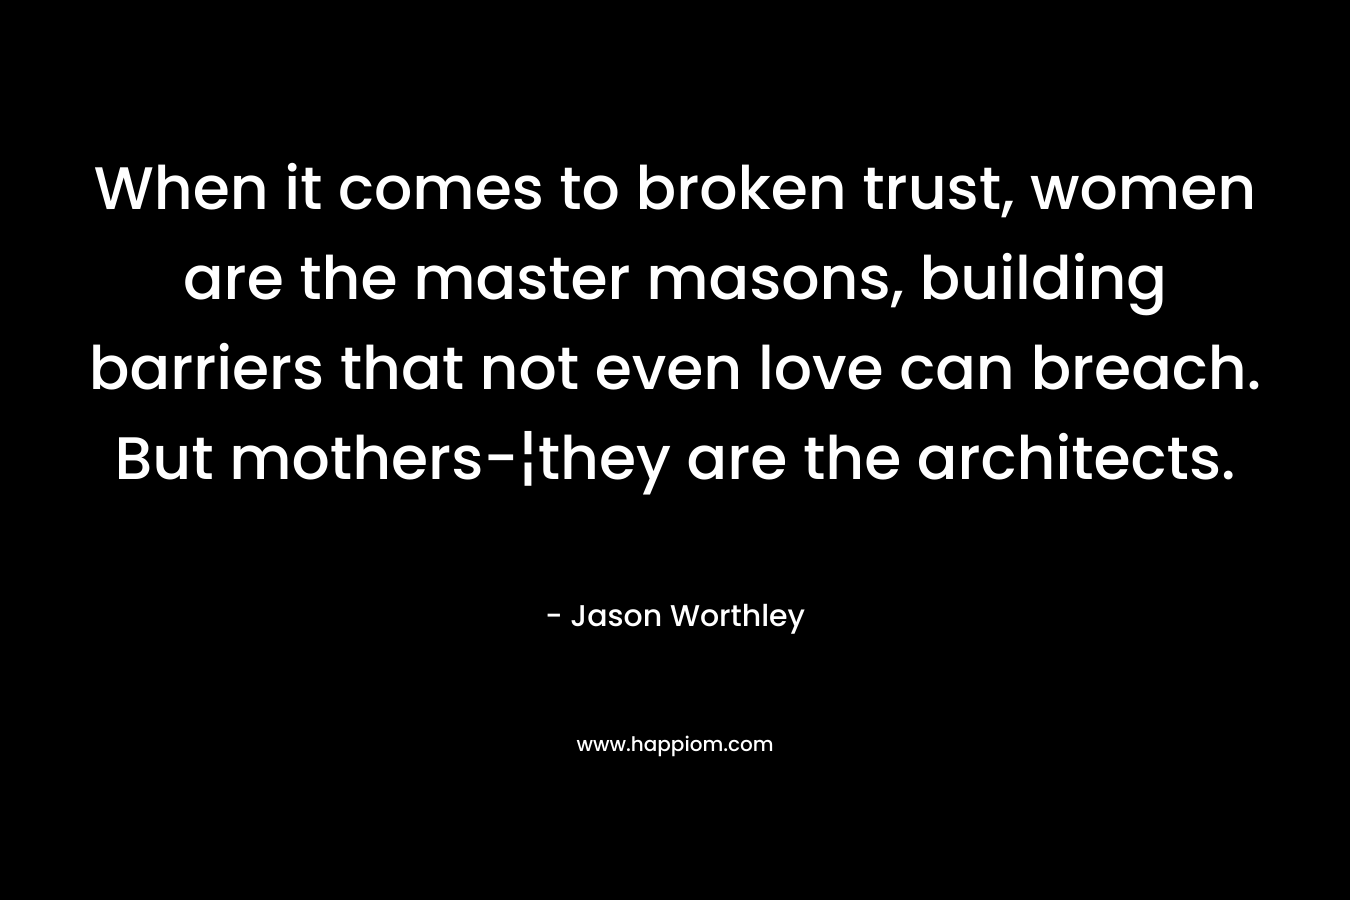 When it comes to broken trust, women are the master masons, building barriers that not even love can breach. But mothers-¦they are the architects.